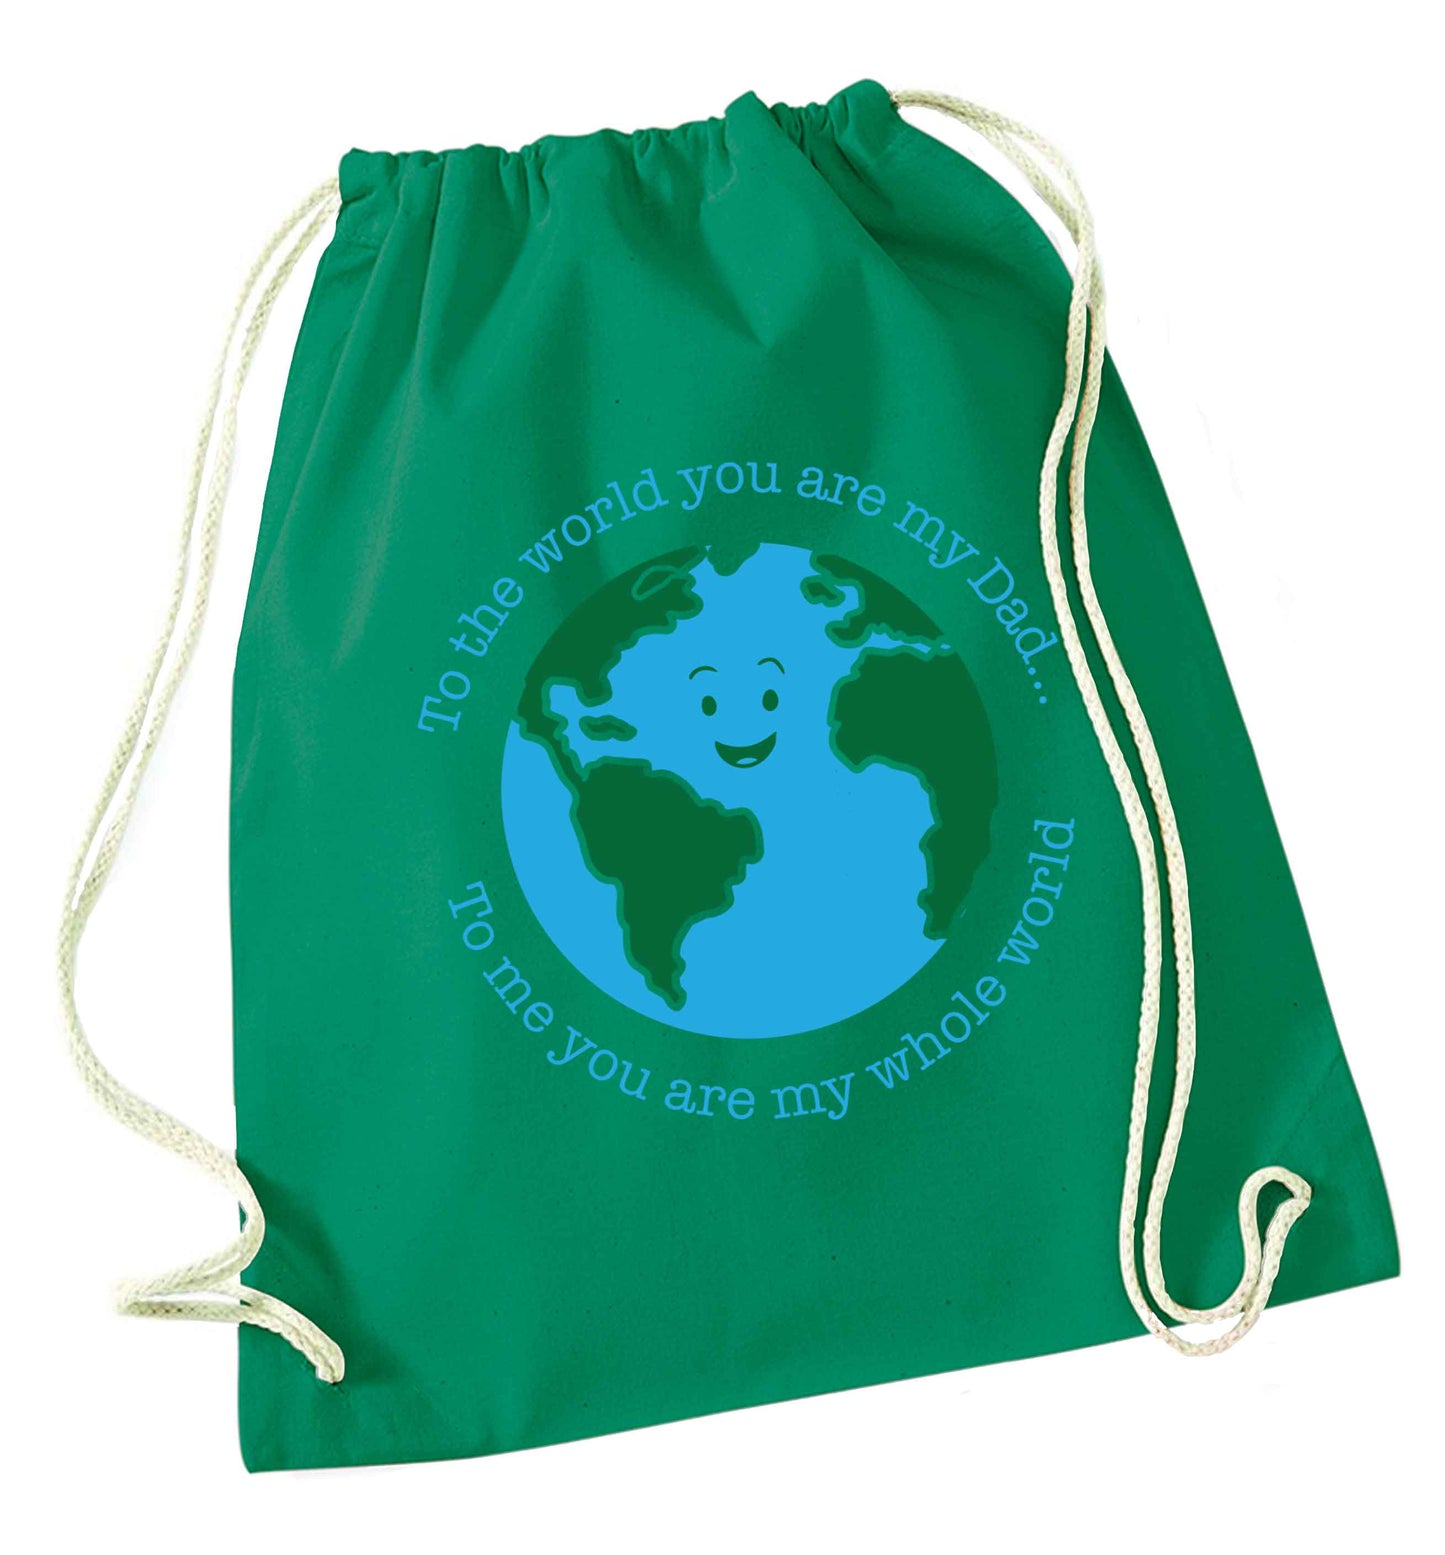 To the world you are my dad, to me you are my whole world green drawstring bag